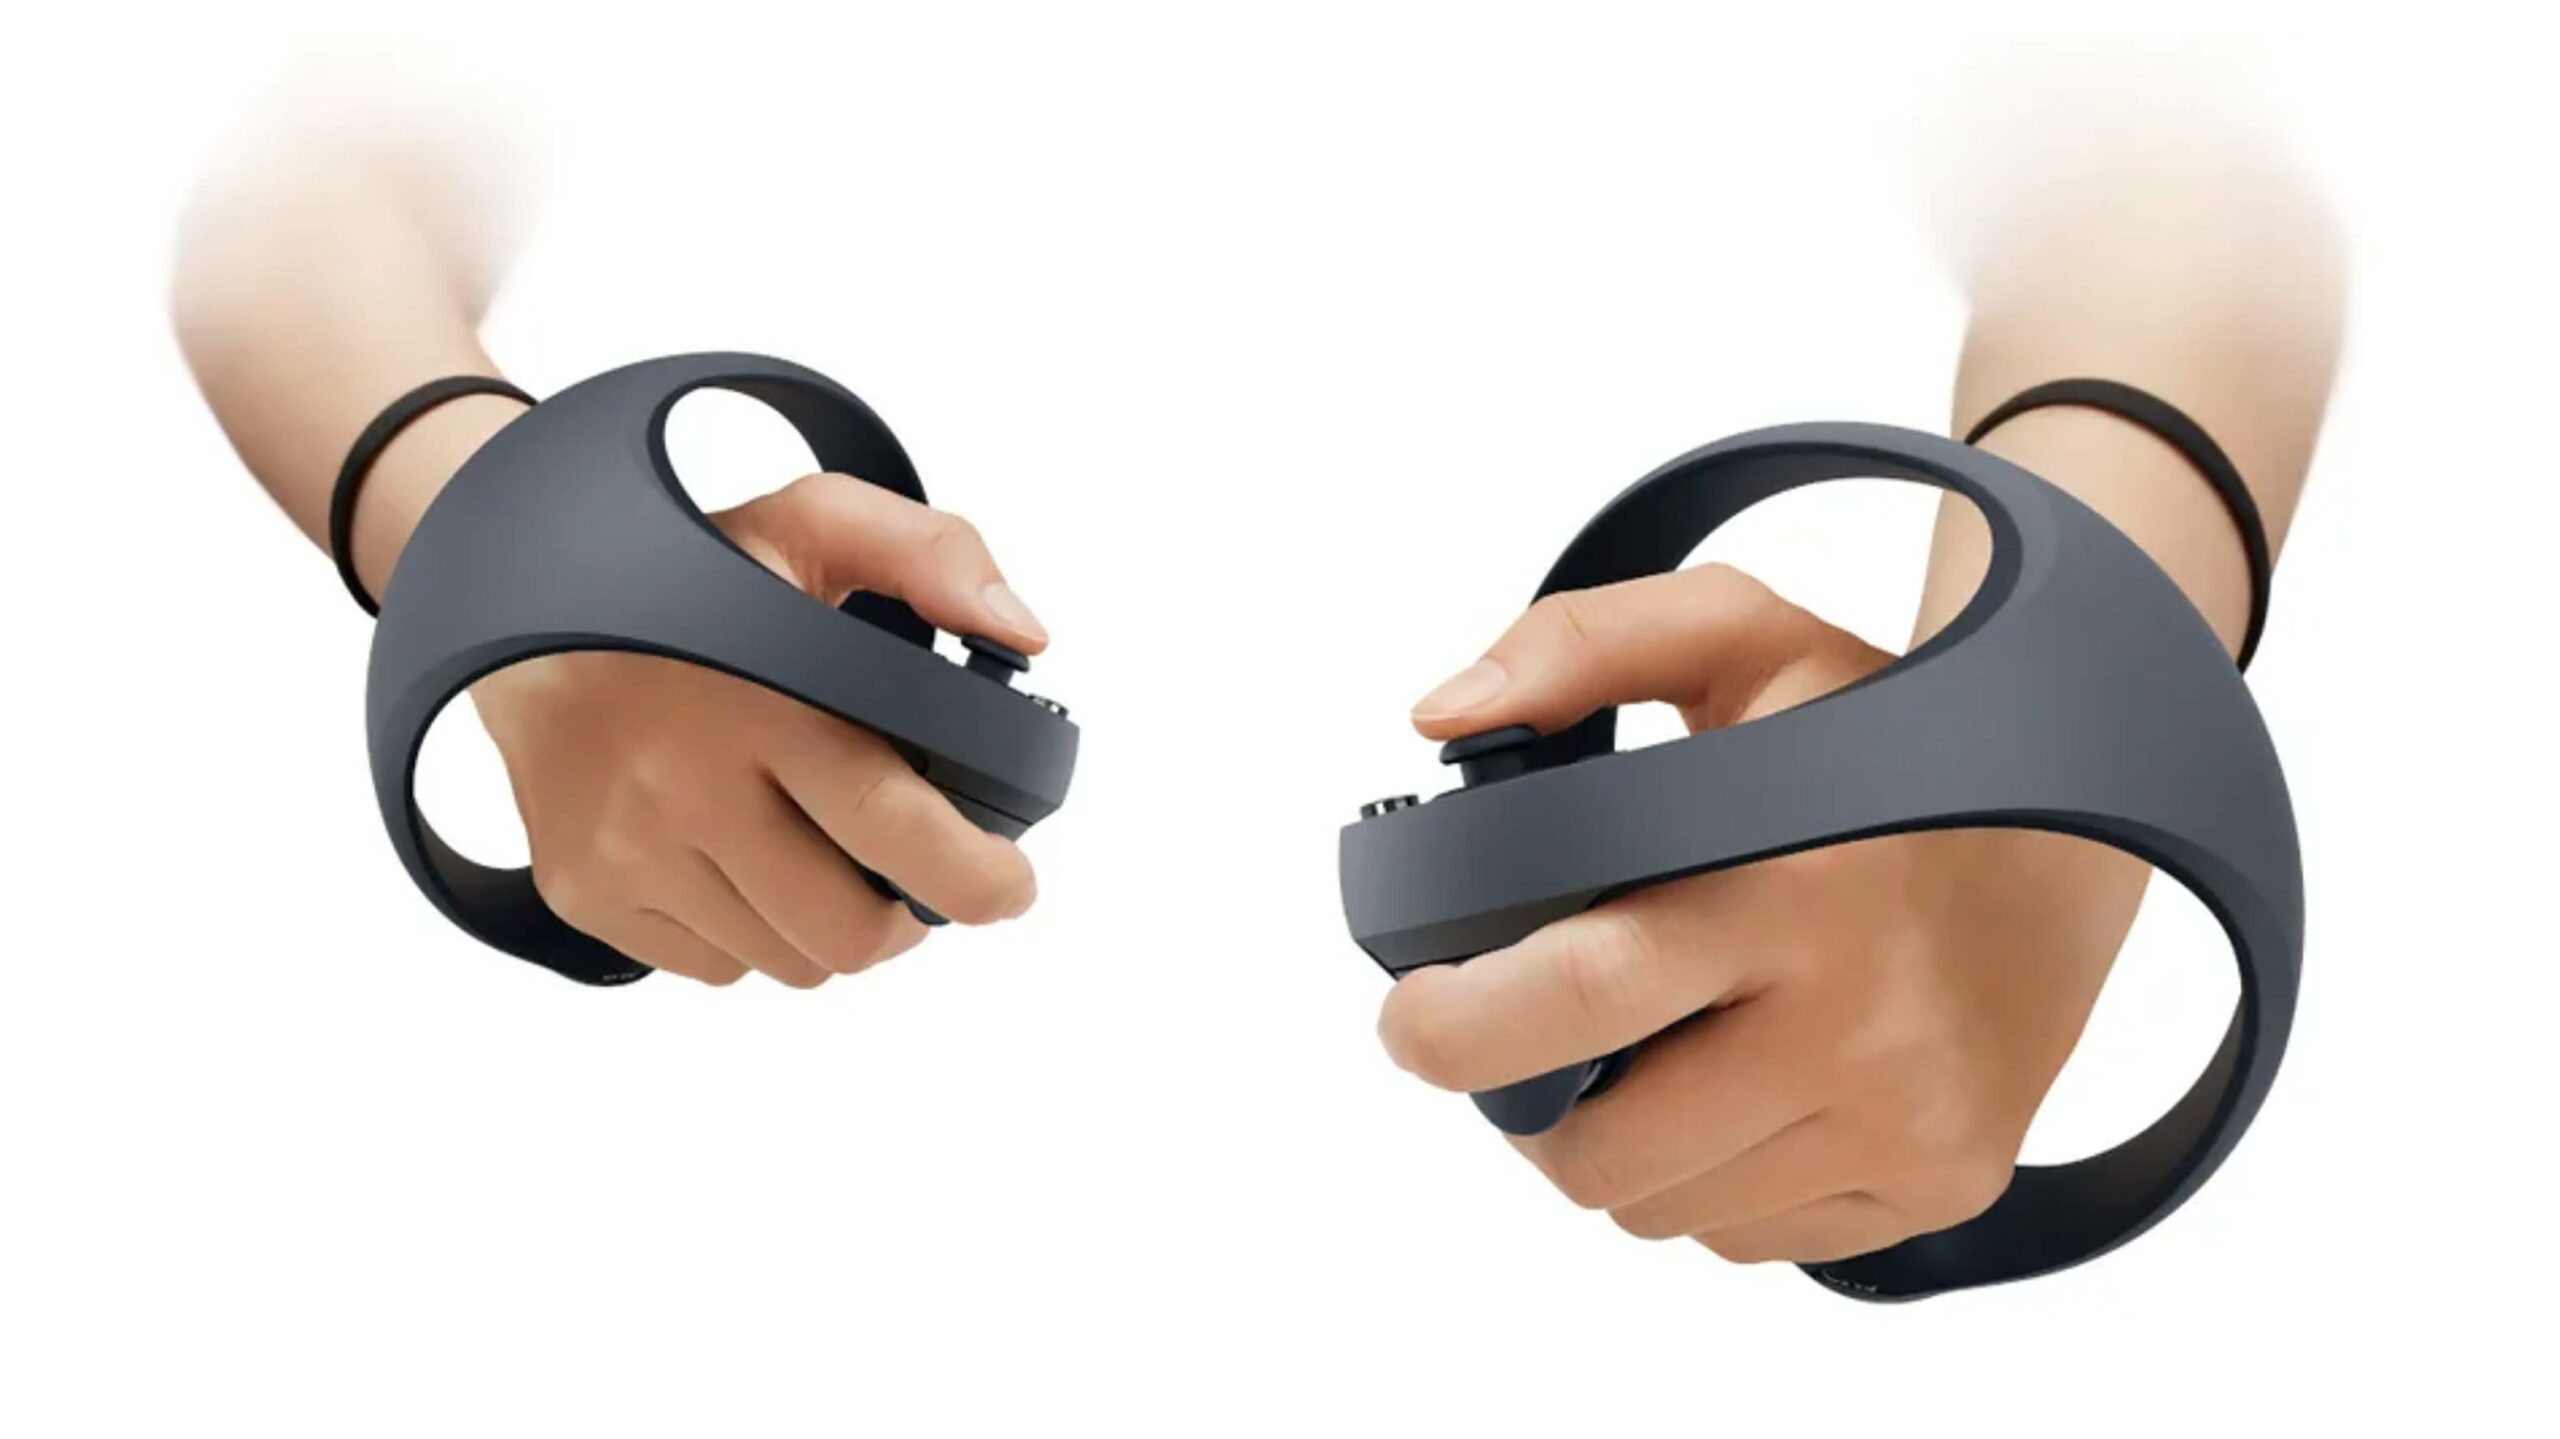 PS VR 2 controllers